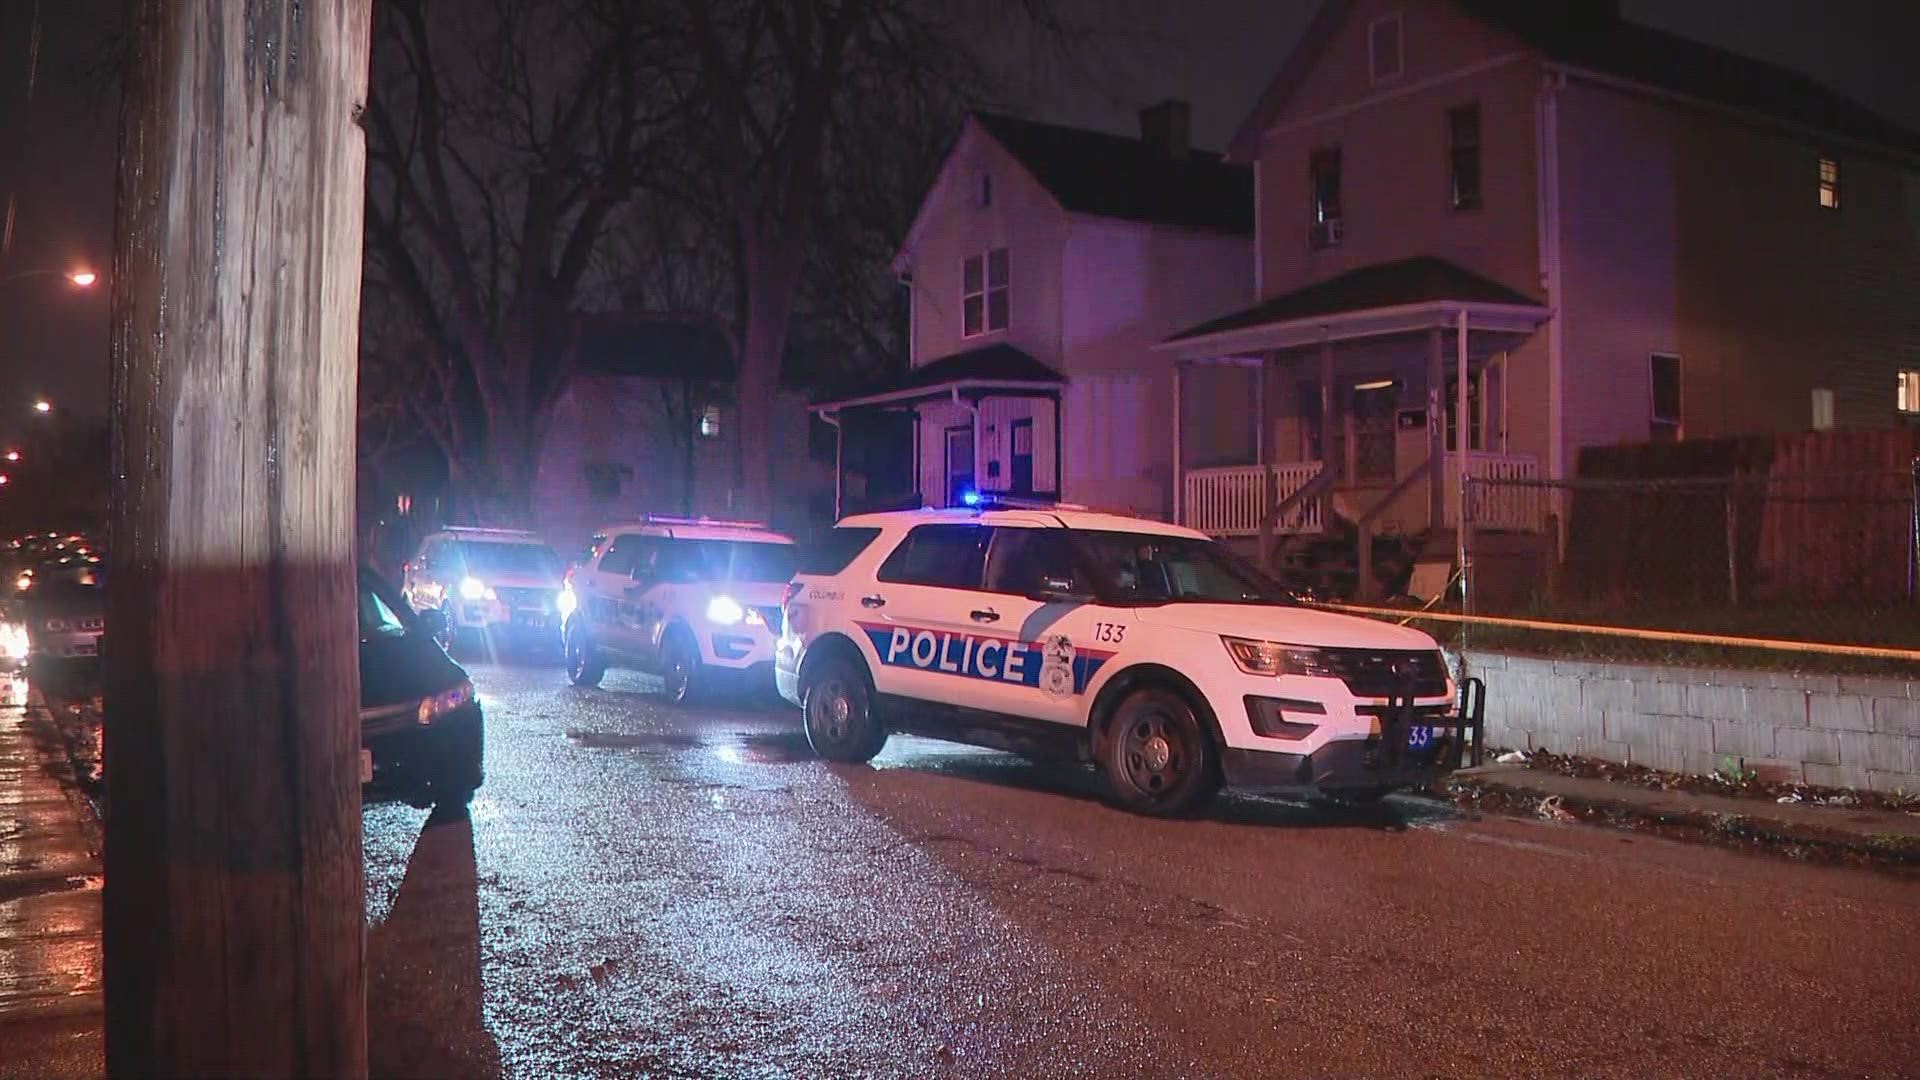 Police said the shooting happened just after 5 p.m. in the 400 block of East Markison Avenue off of Parsons Avenue.